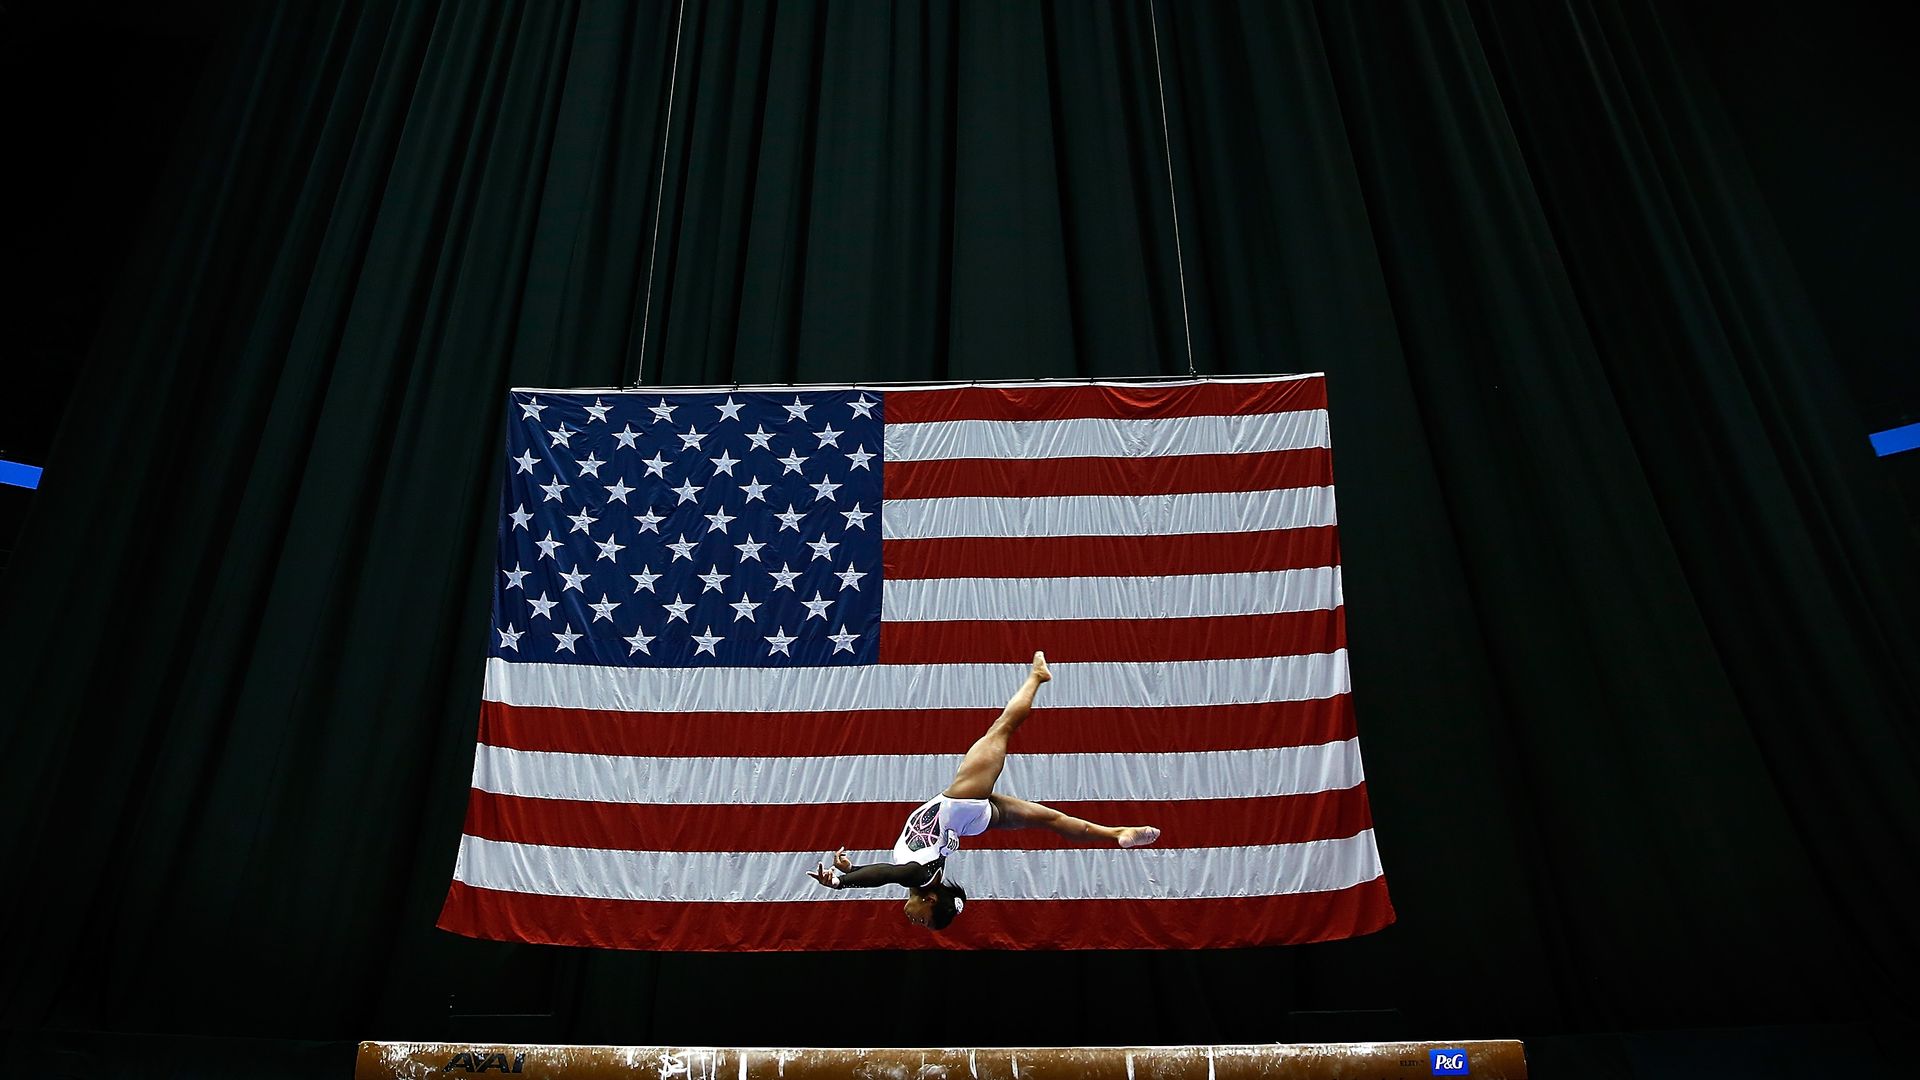  Simone Biles competes on the balance beam during the 2014 P&G Gymnastics Championships at Consol Energy Center on August 21, 2014 in Pittsburgh, Pennsylvania. 